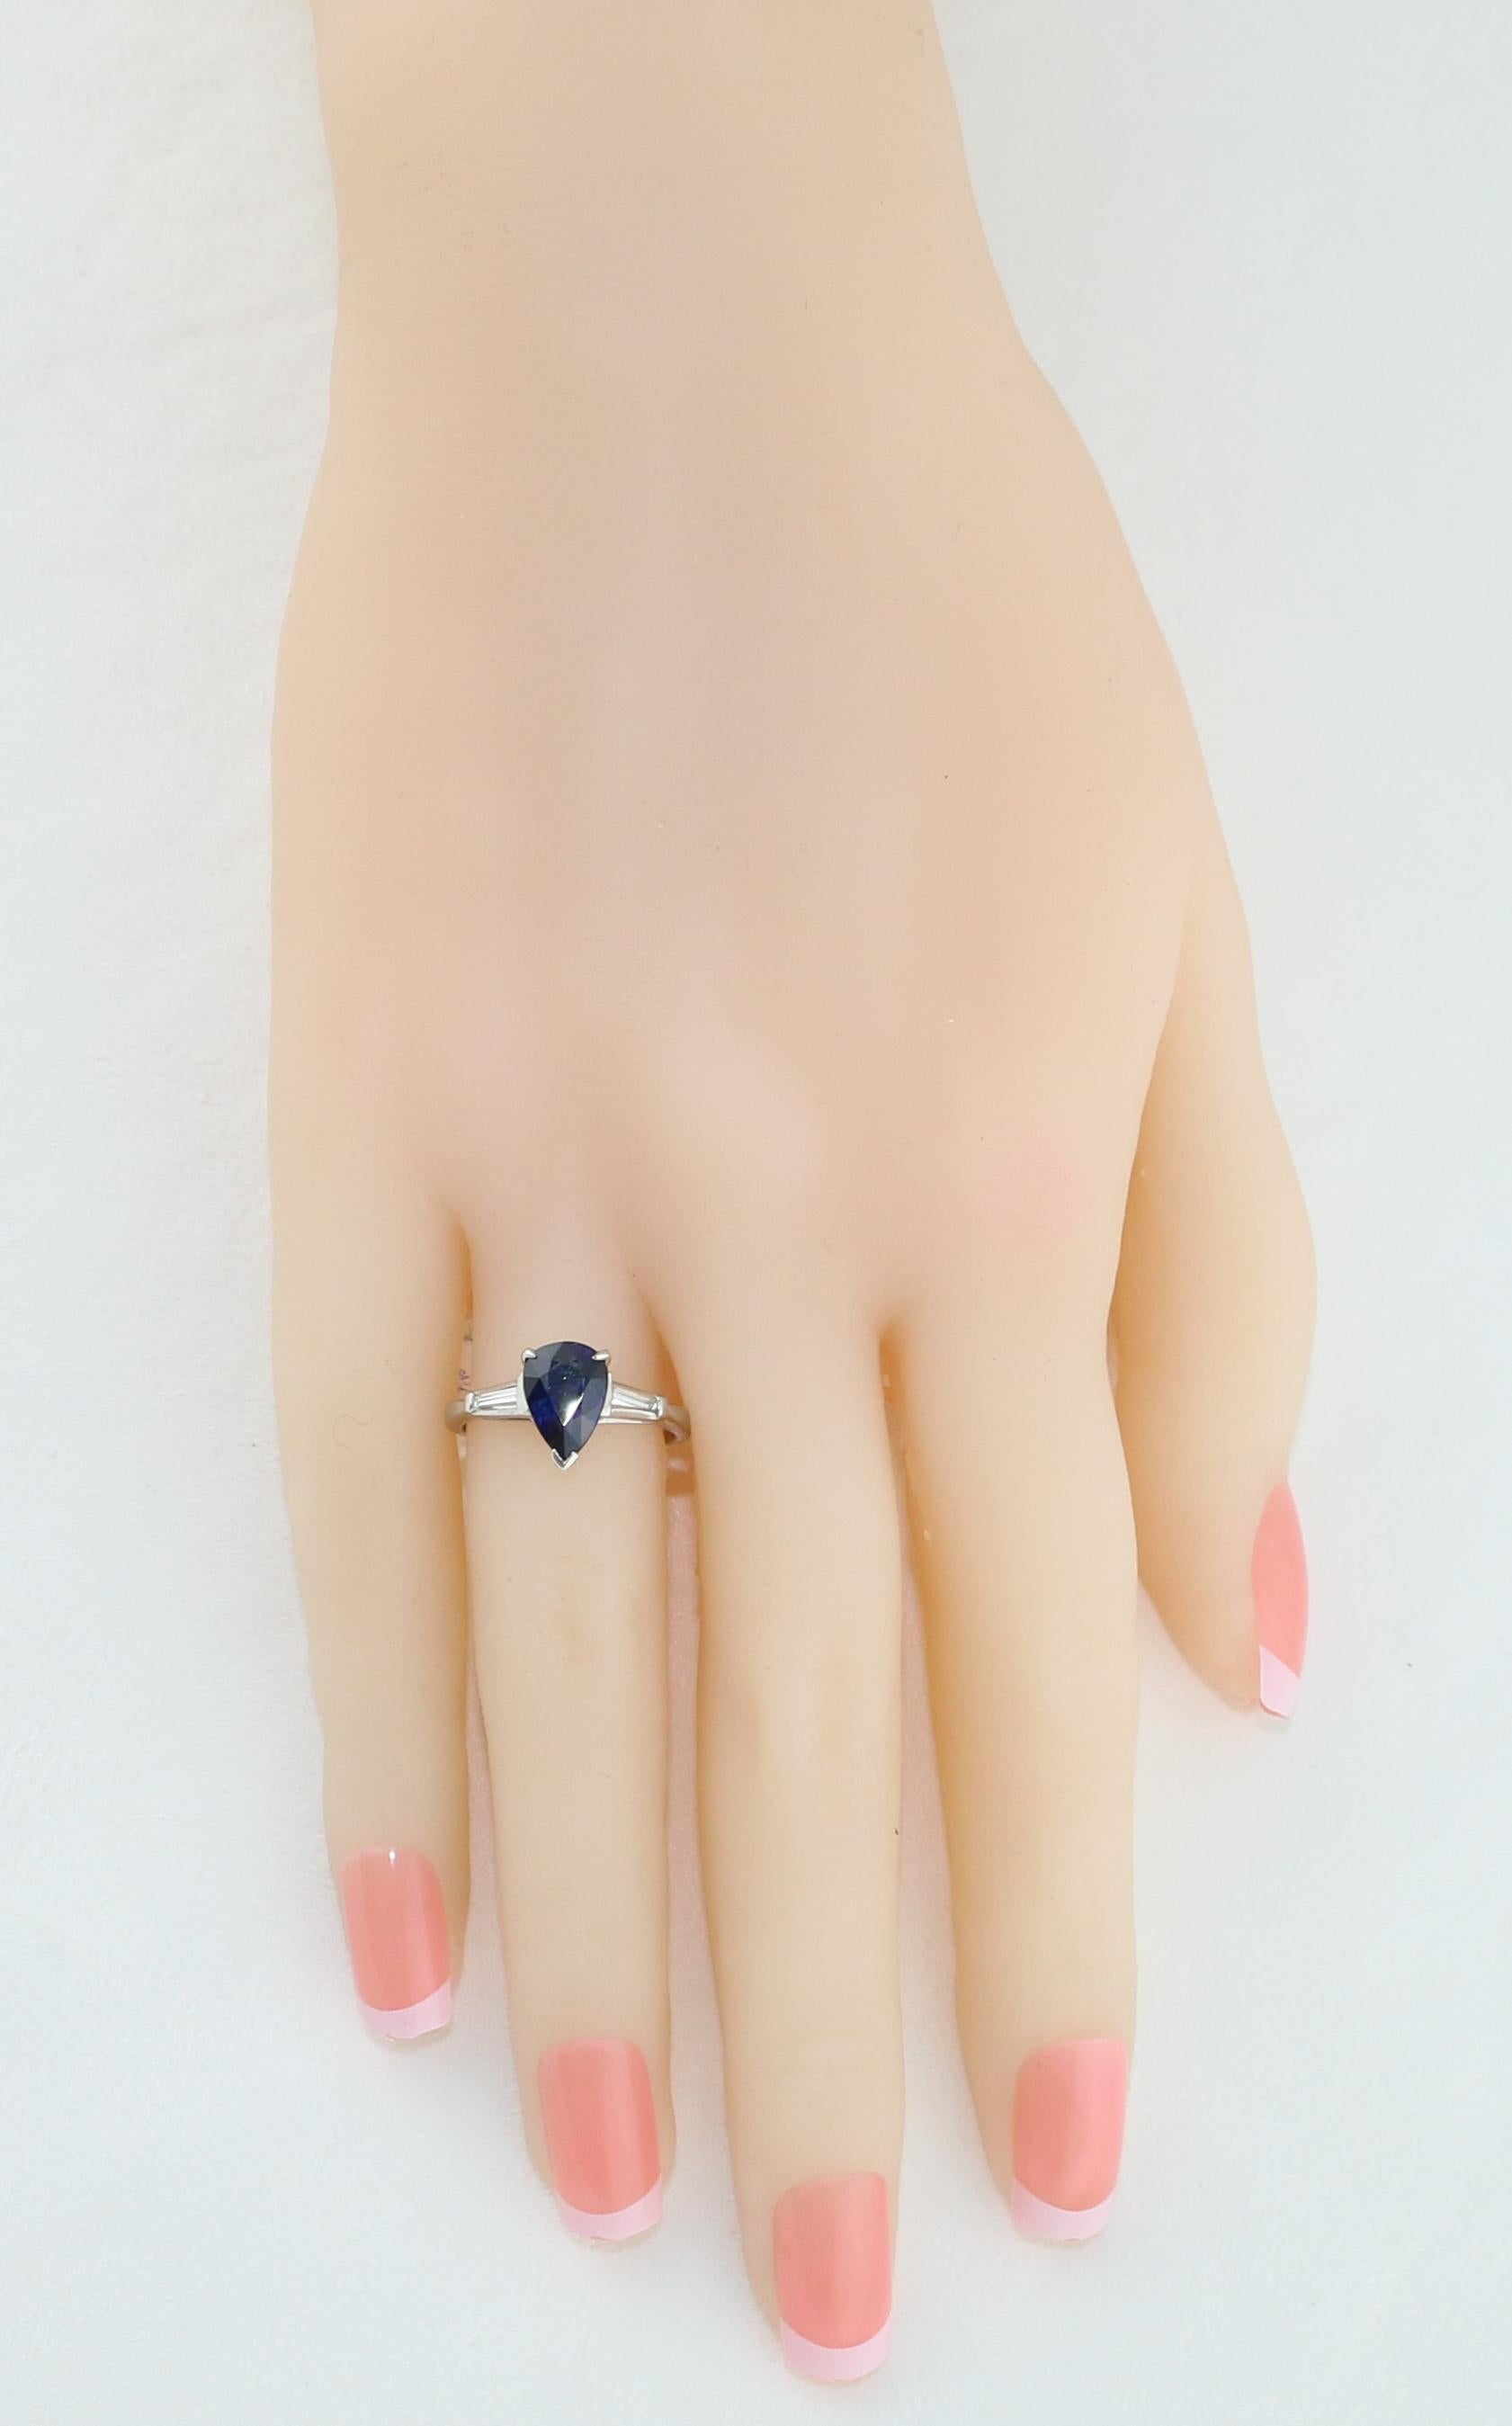 Certified 2.01 Carat Pear Blue Sapphire Diamond Platinum Ring In New Condition For Sale In New York, NY